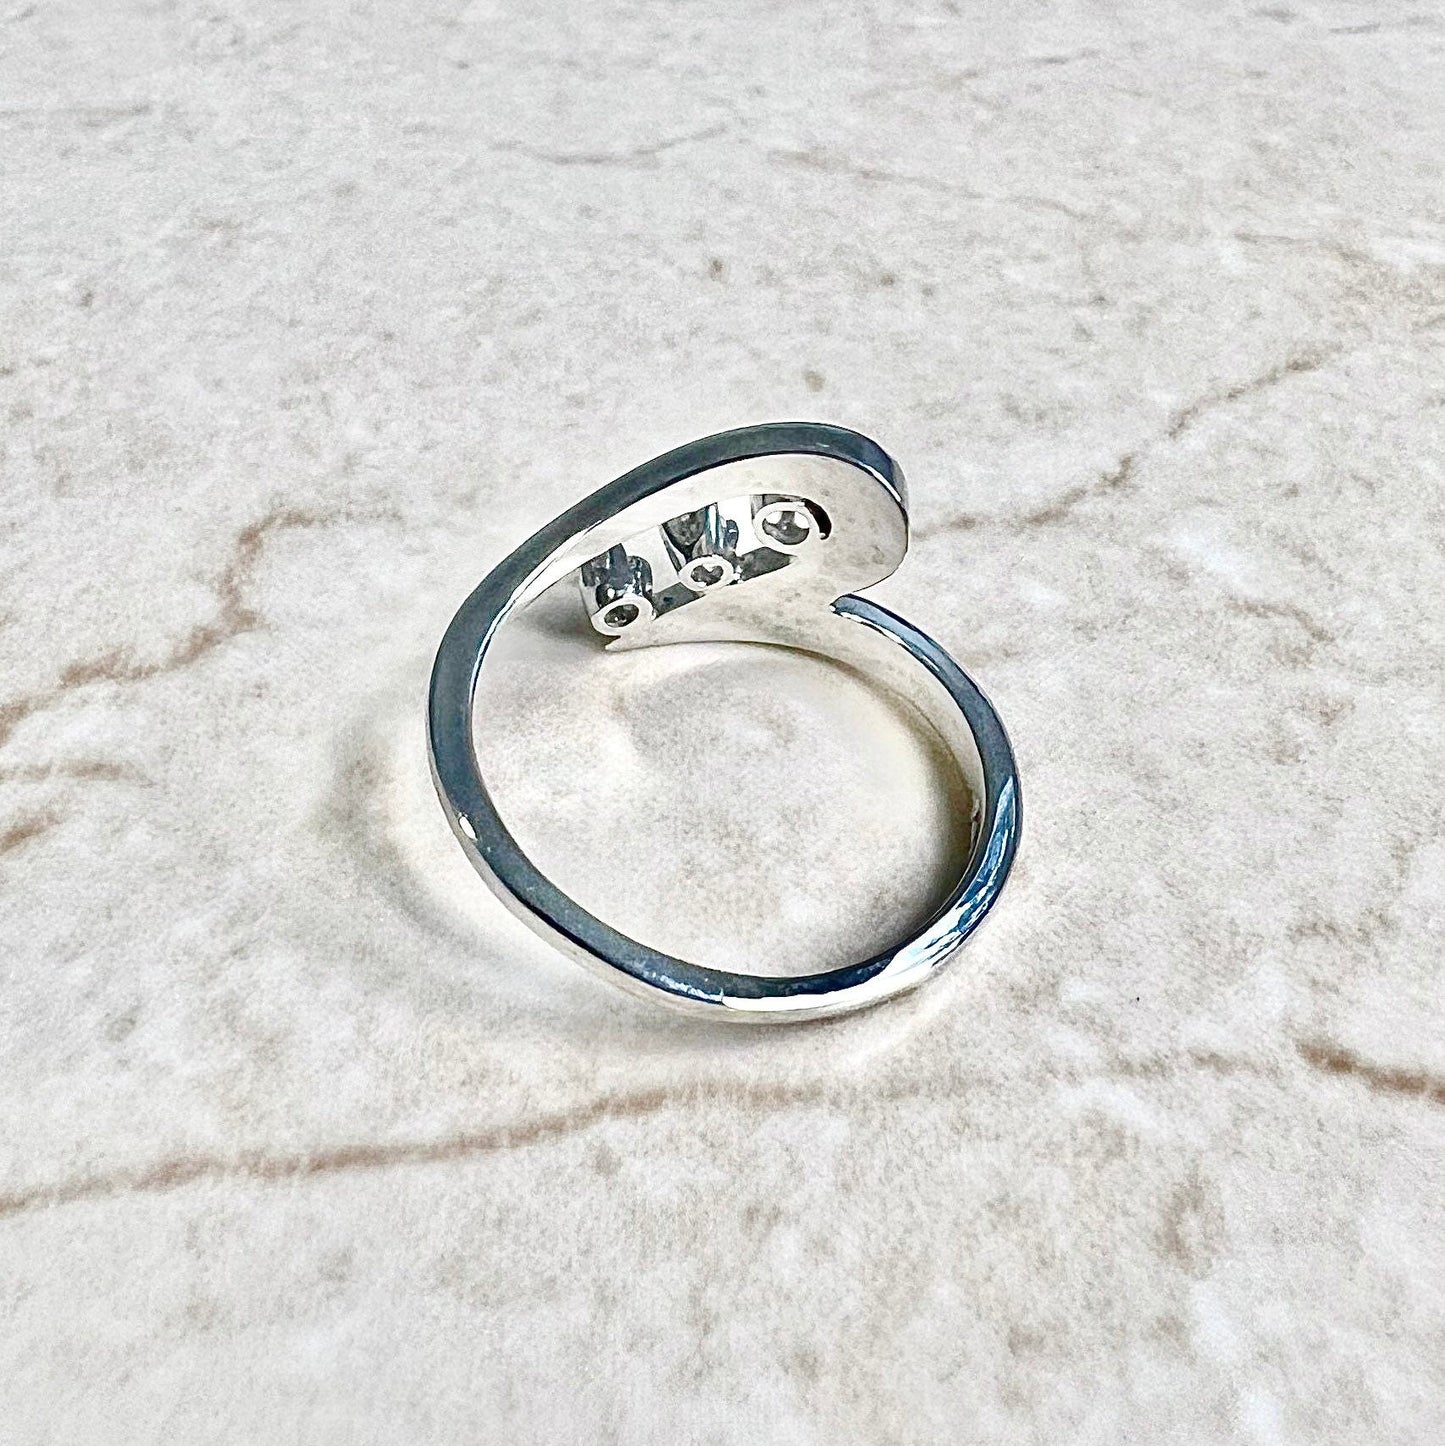 14K 3 Stone Diamond Ring - White Gold Three Stone Ring - Cocktail Ring - Anniversary Ring - Promise Ring - Birthday Gift -Best Gifts For Her